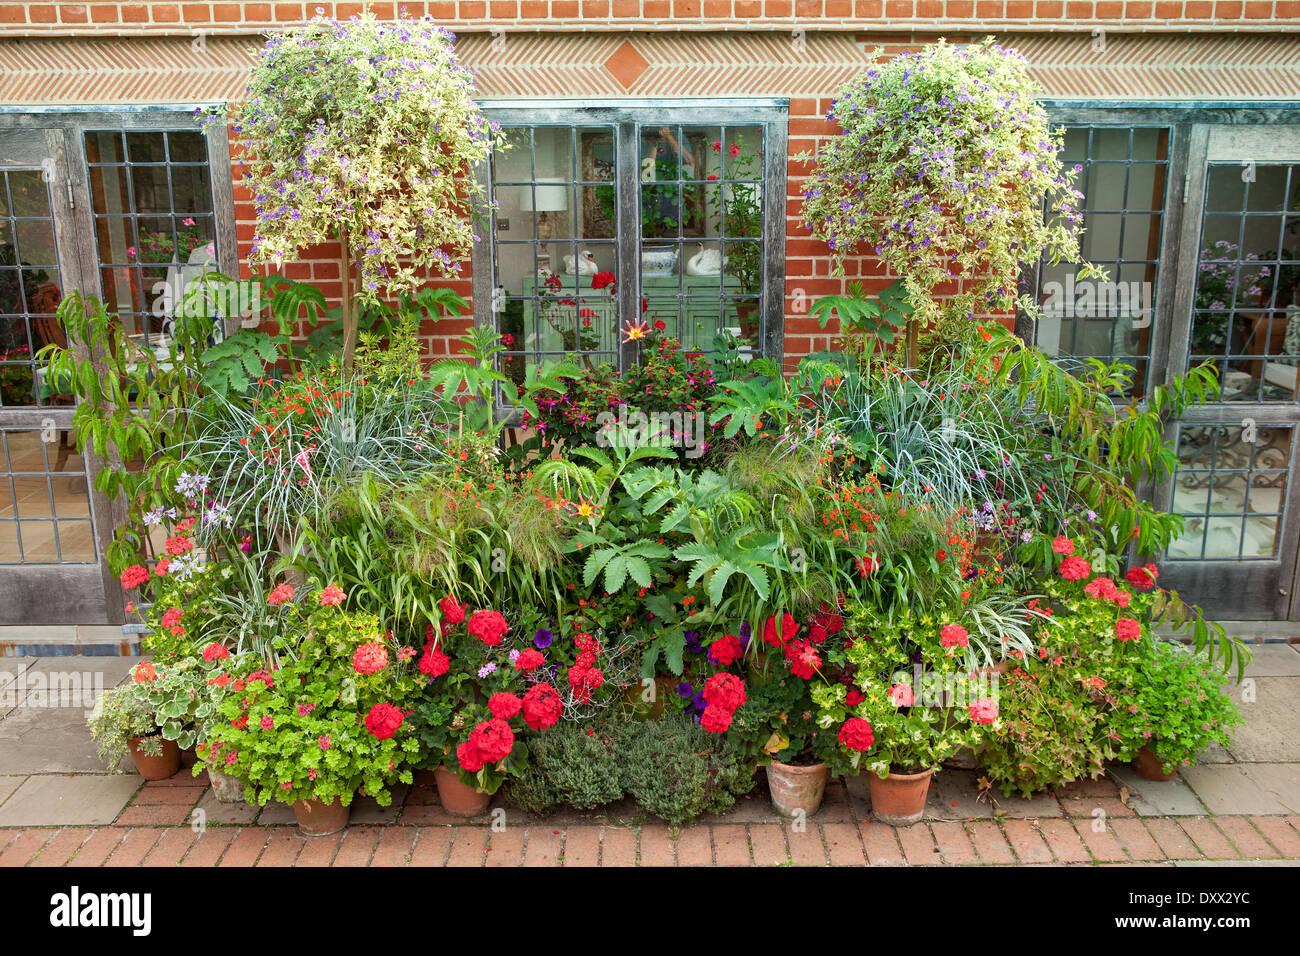 Mixed container combinations and display. August. Summer. Stock Photo